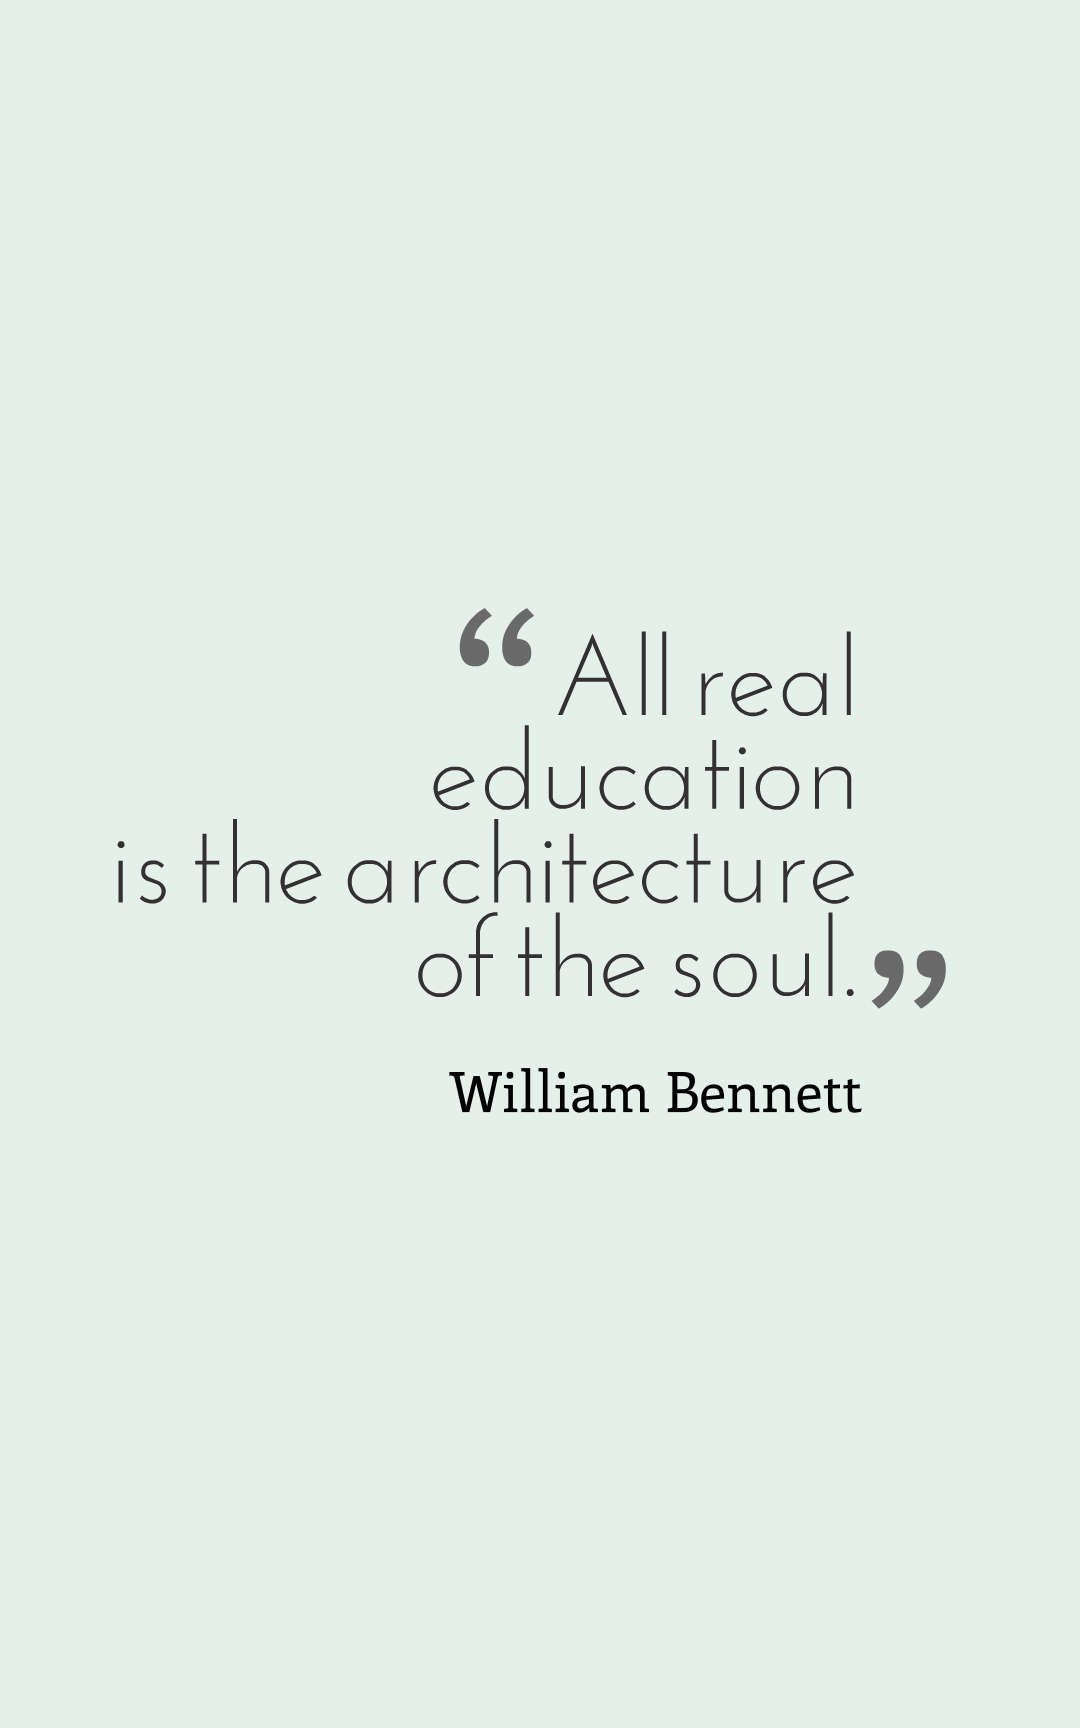 All real education is the architecture of the soul.